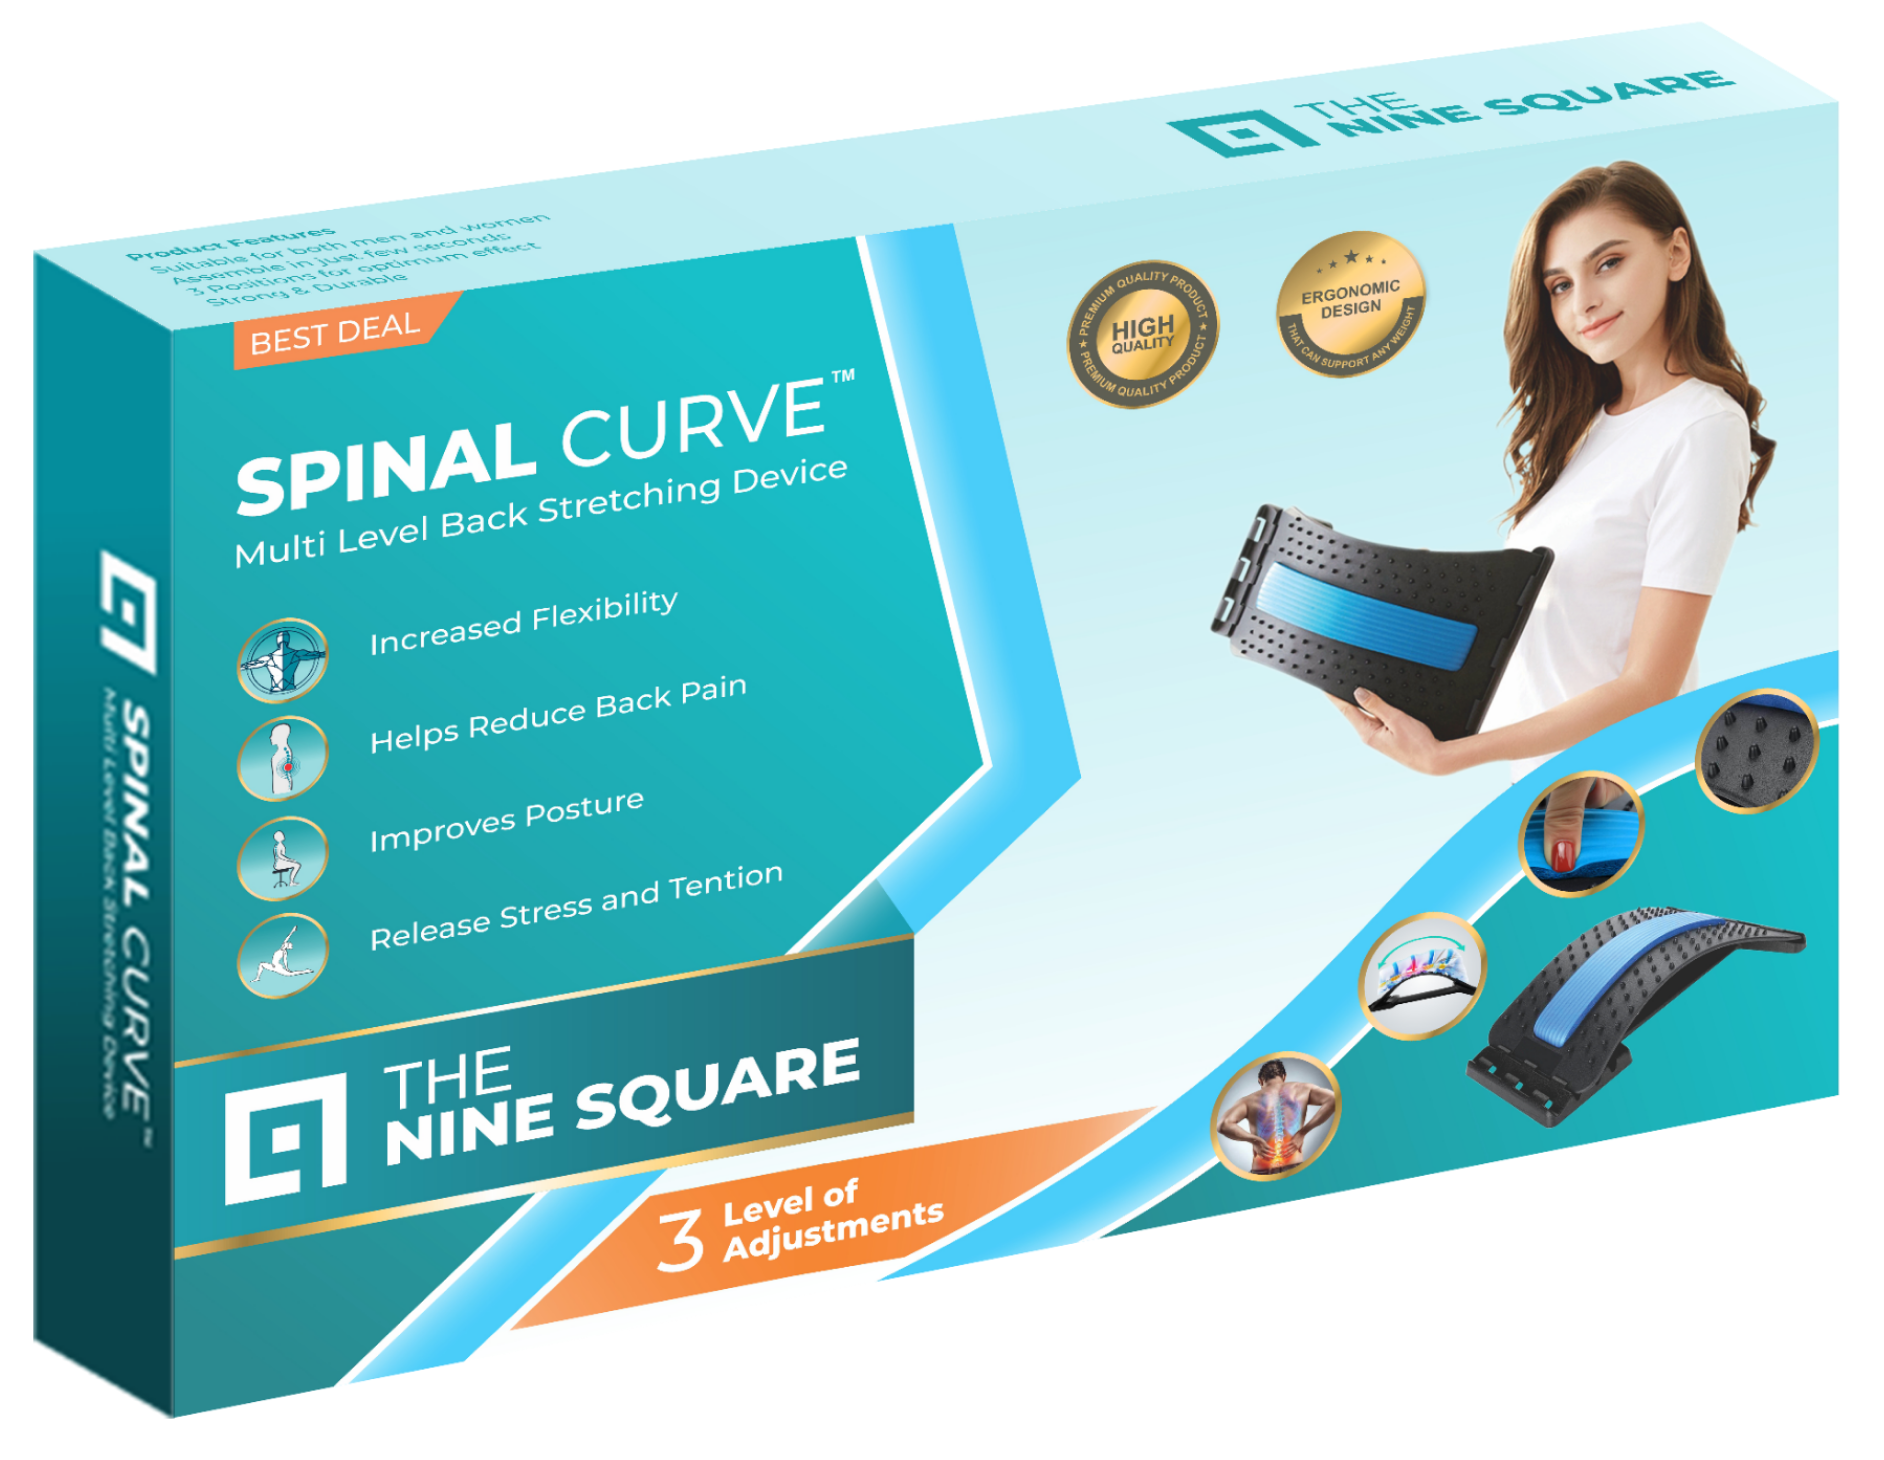 Spinal Curve